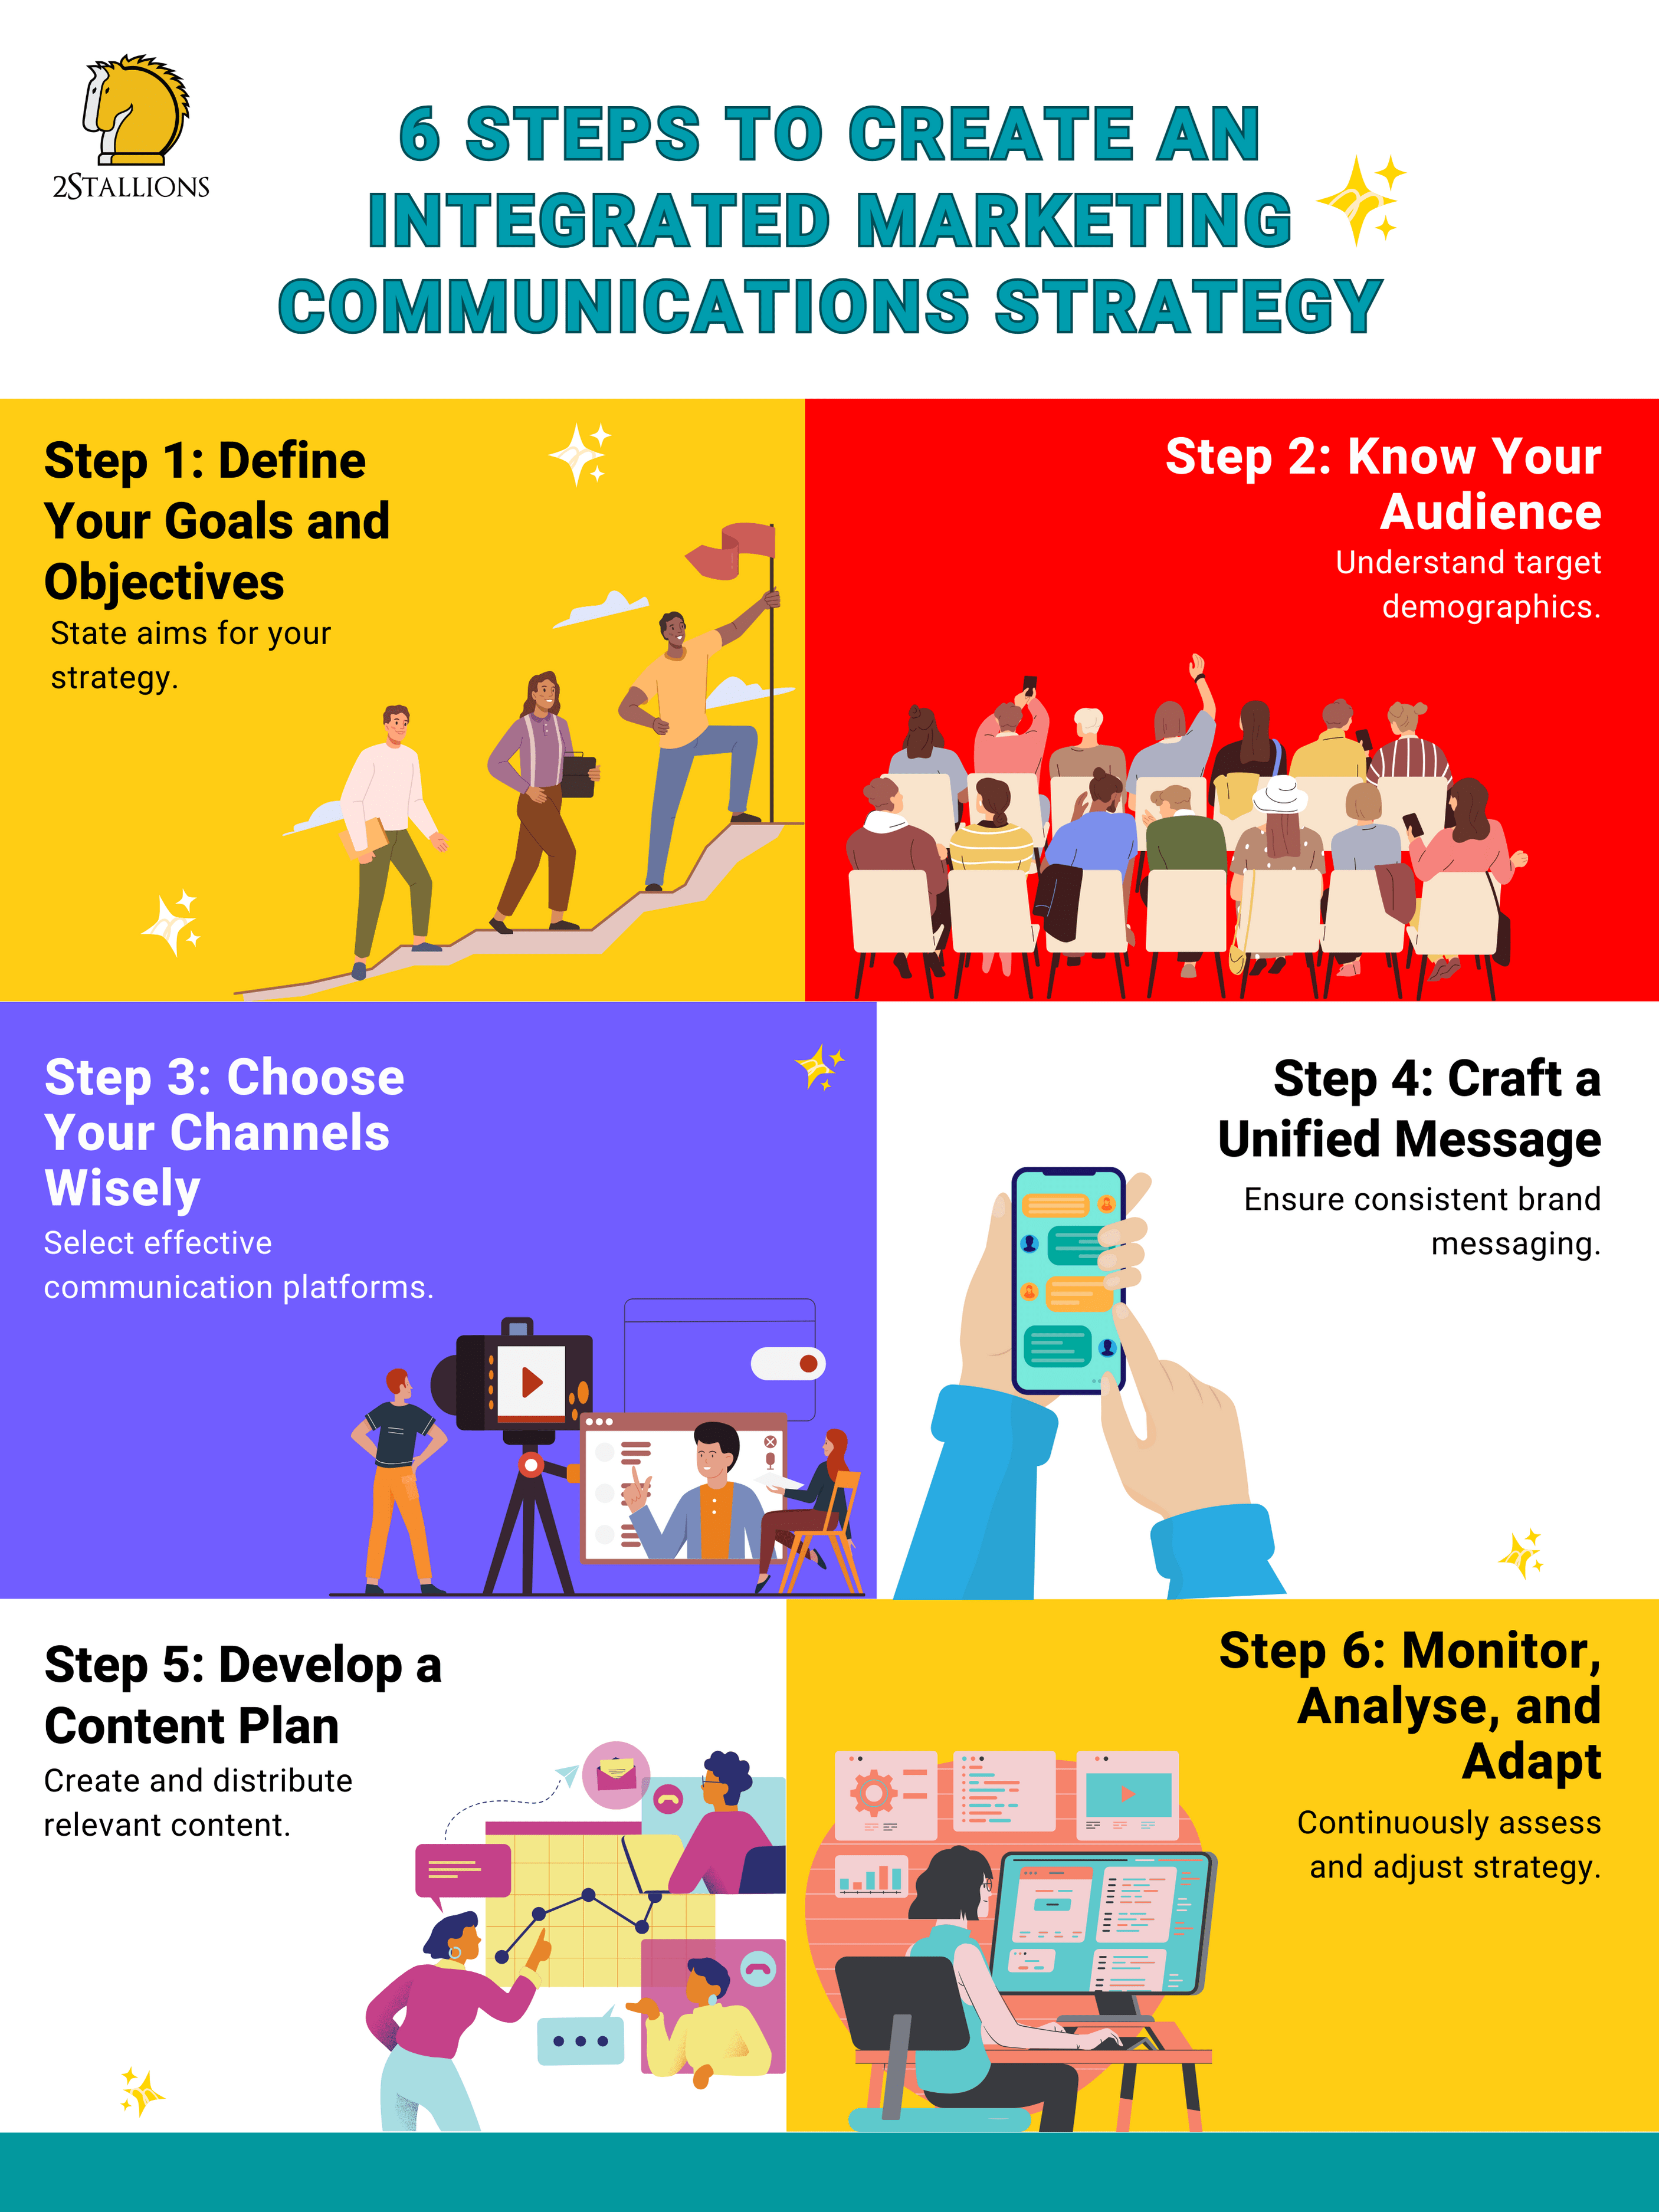 How to Develop an Integrated Marketing Communications Strategy | 2Stallions